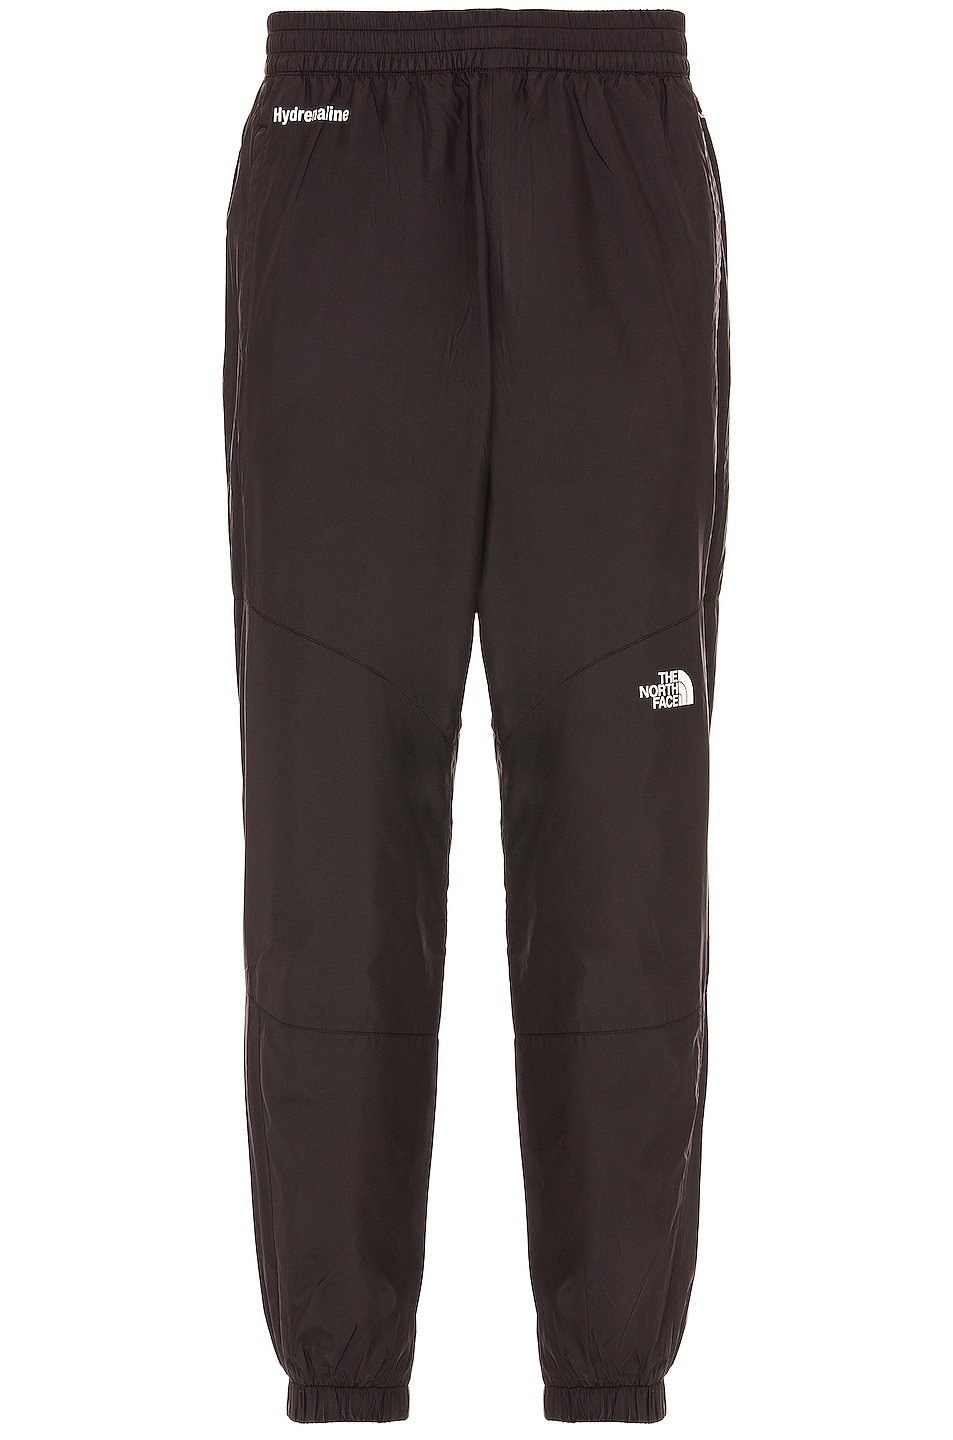 Image 1 of The North Face s Hydrenaline Pant 2000 in Black